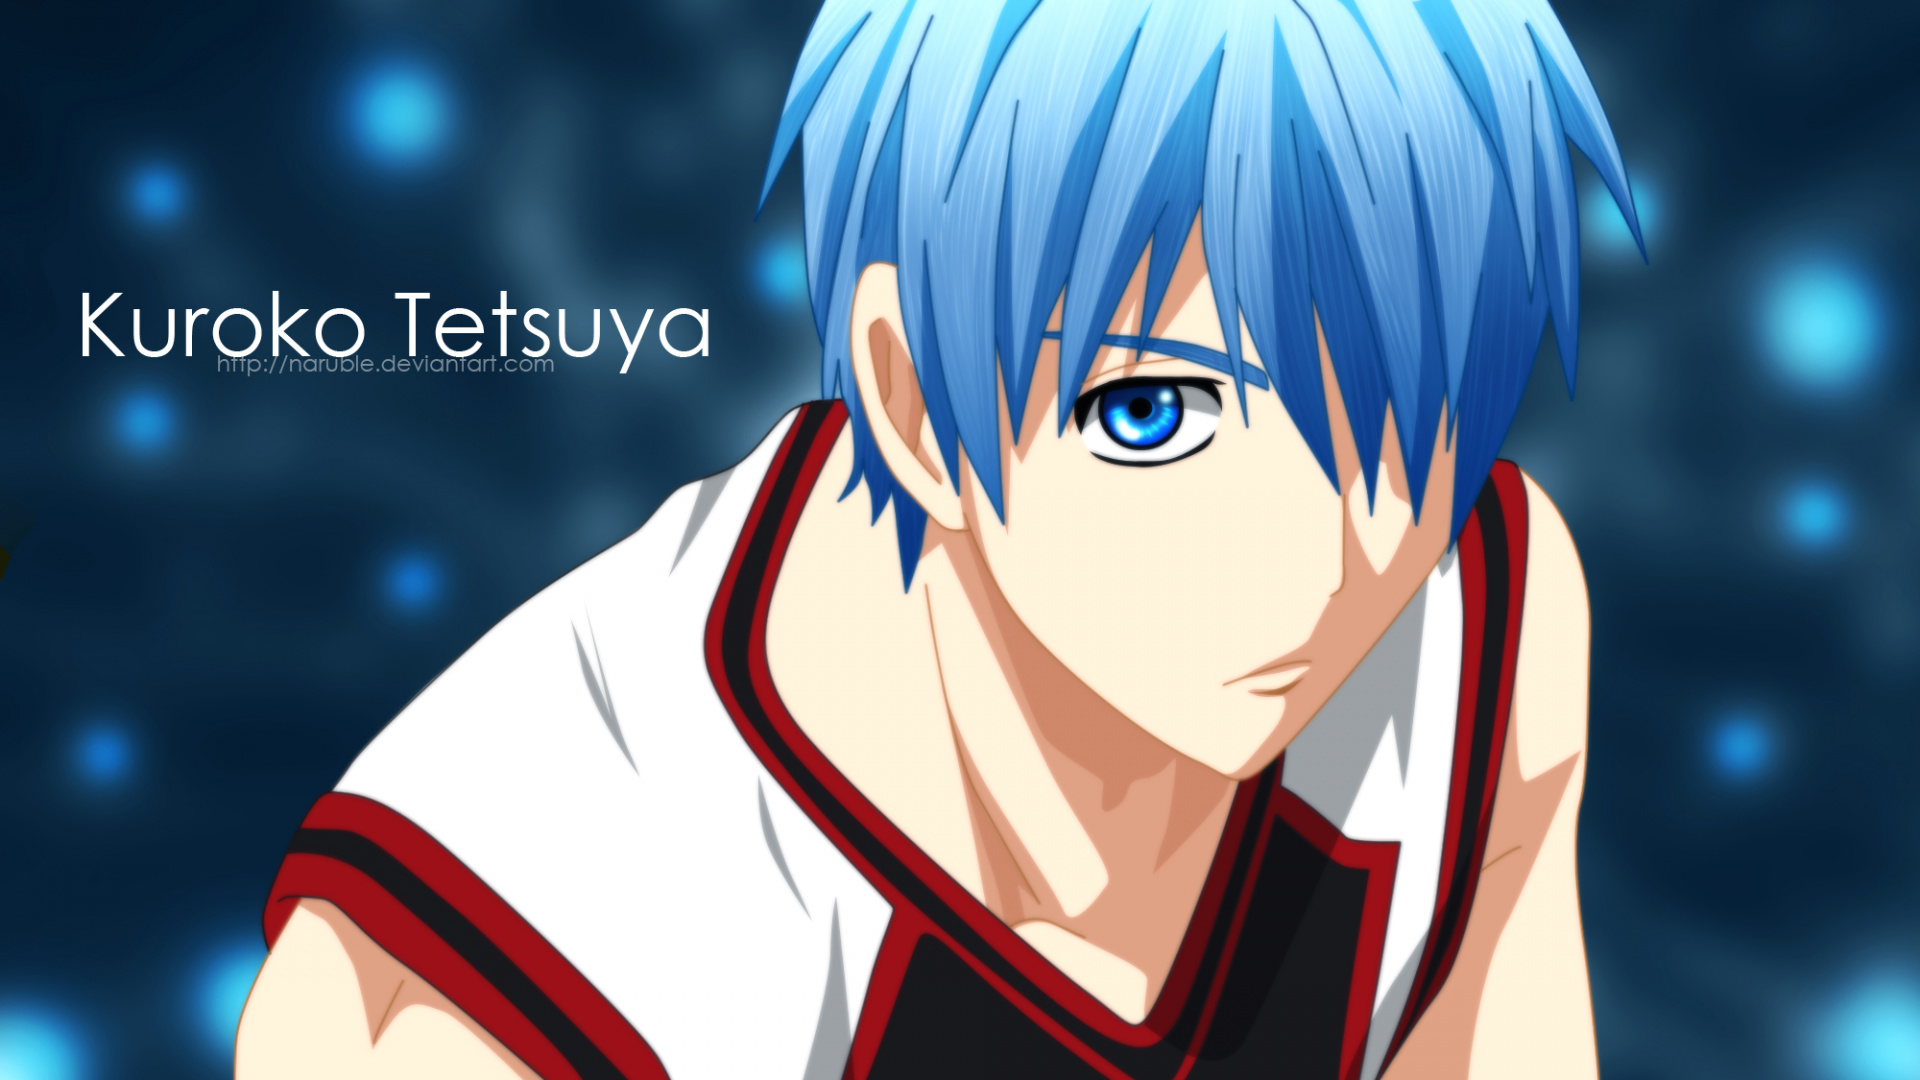 Personnage D'anime Masculin Aux Cheveux Bleus. Wallpaper in 1920x1080 Resolution